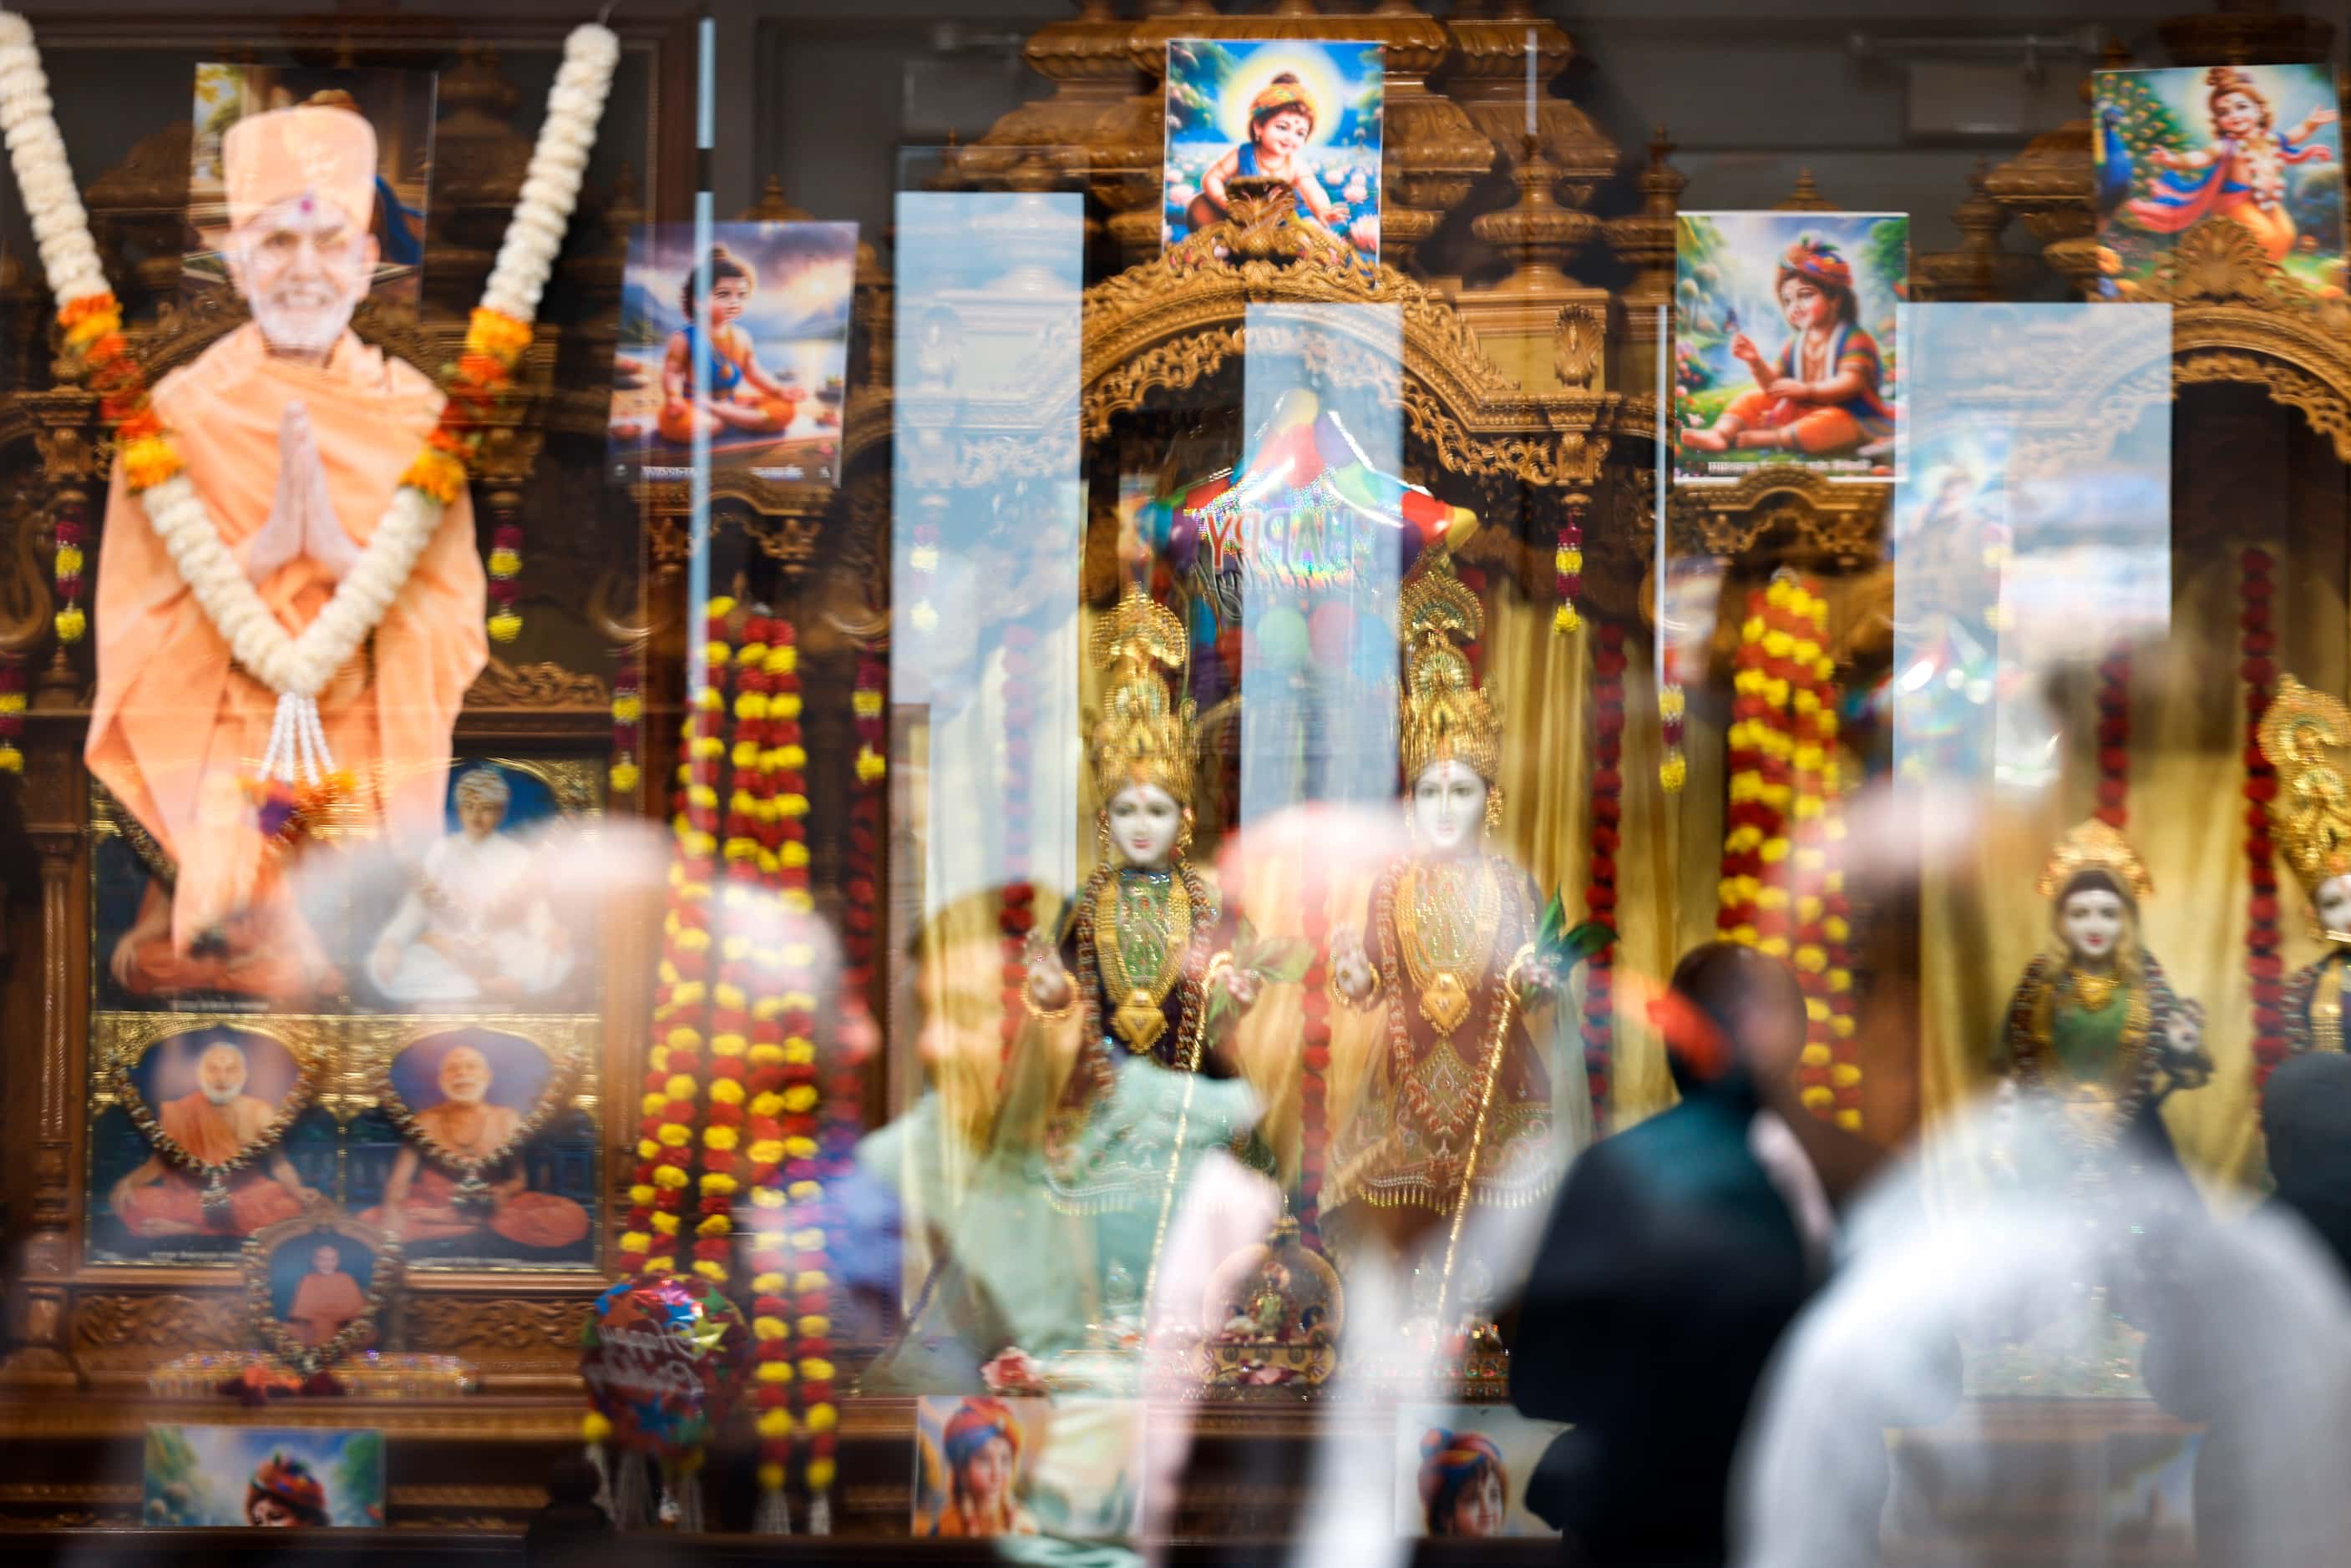 A photo of spiritual leader Mahant Swami Maharaj (left) is reflected on a glass as...